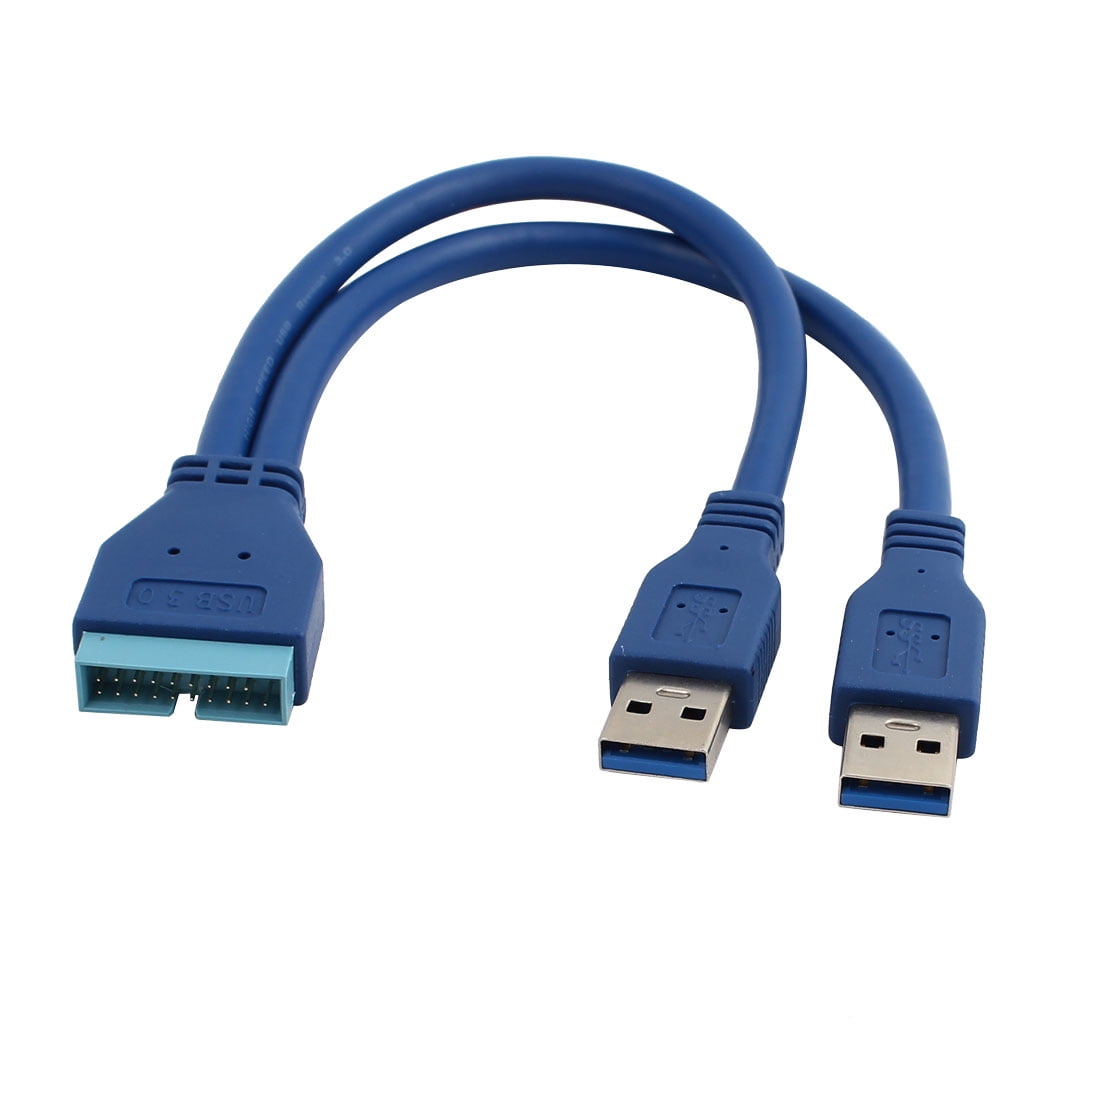 Internal Adapter To 2 Male USB Type A Cable External 27CM - Walmart.com